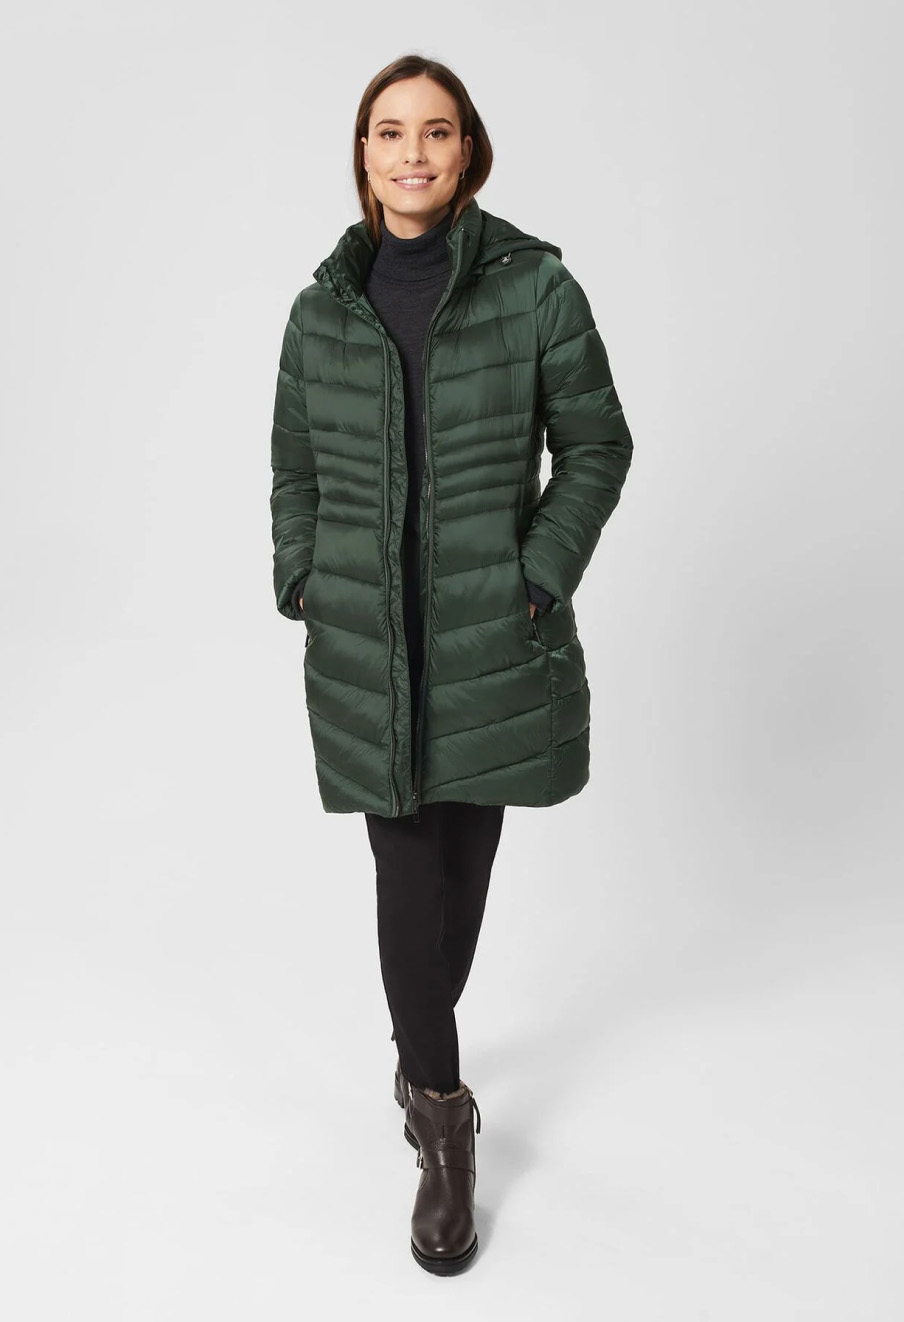 Model wears a Hobbs puffer with panel detailing.